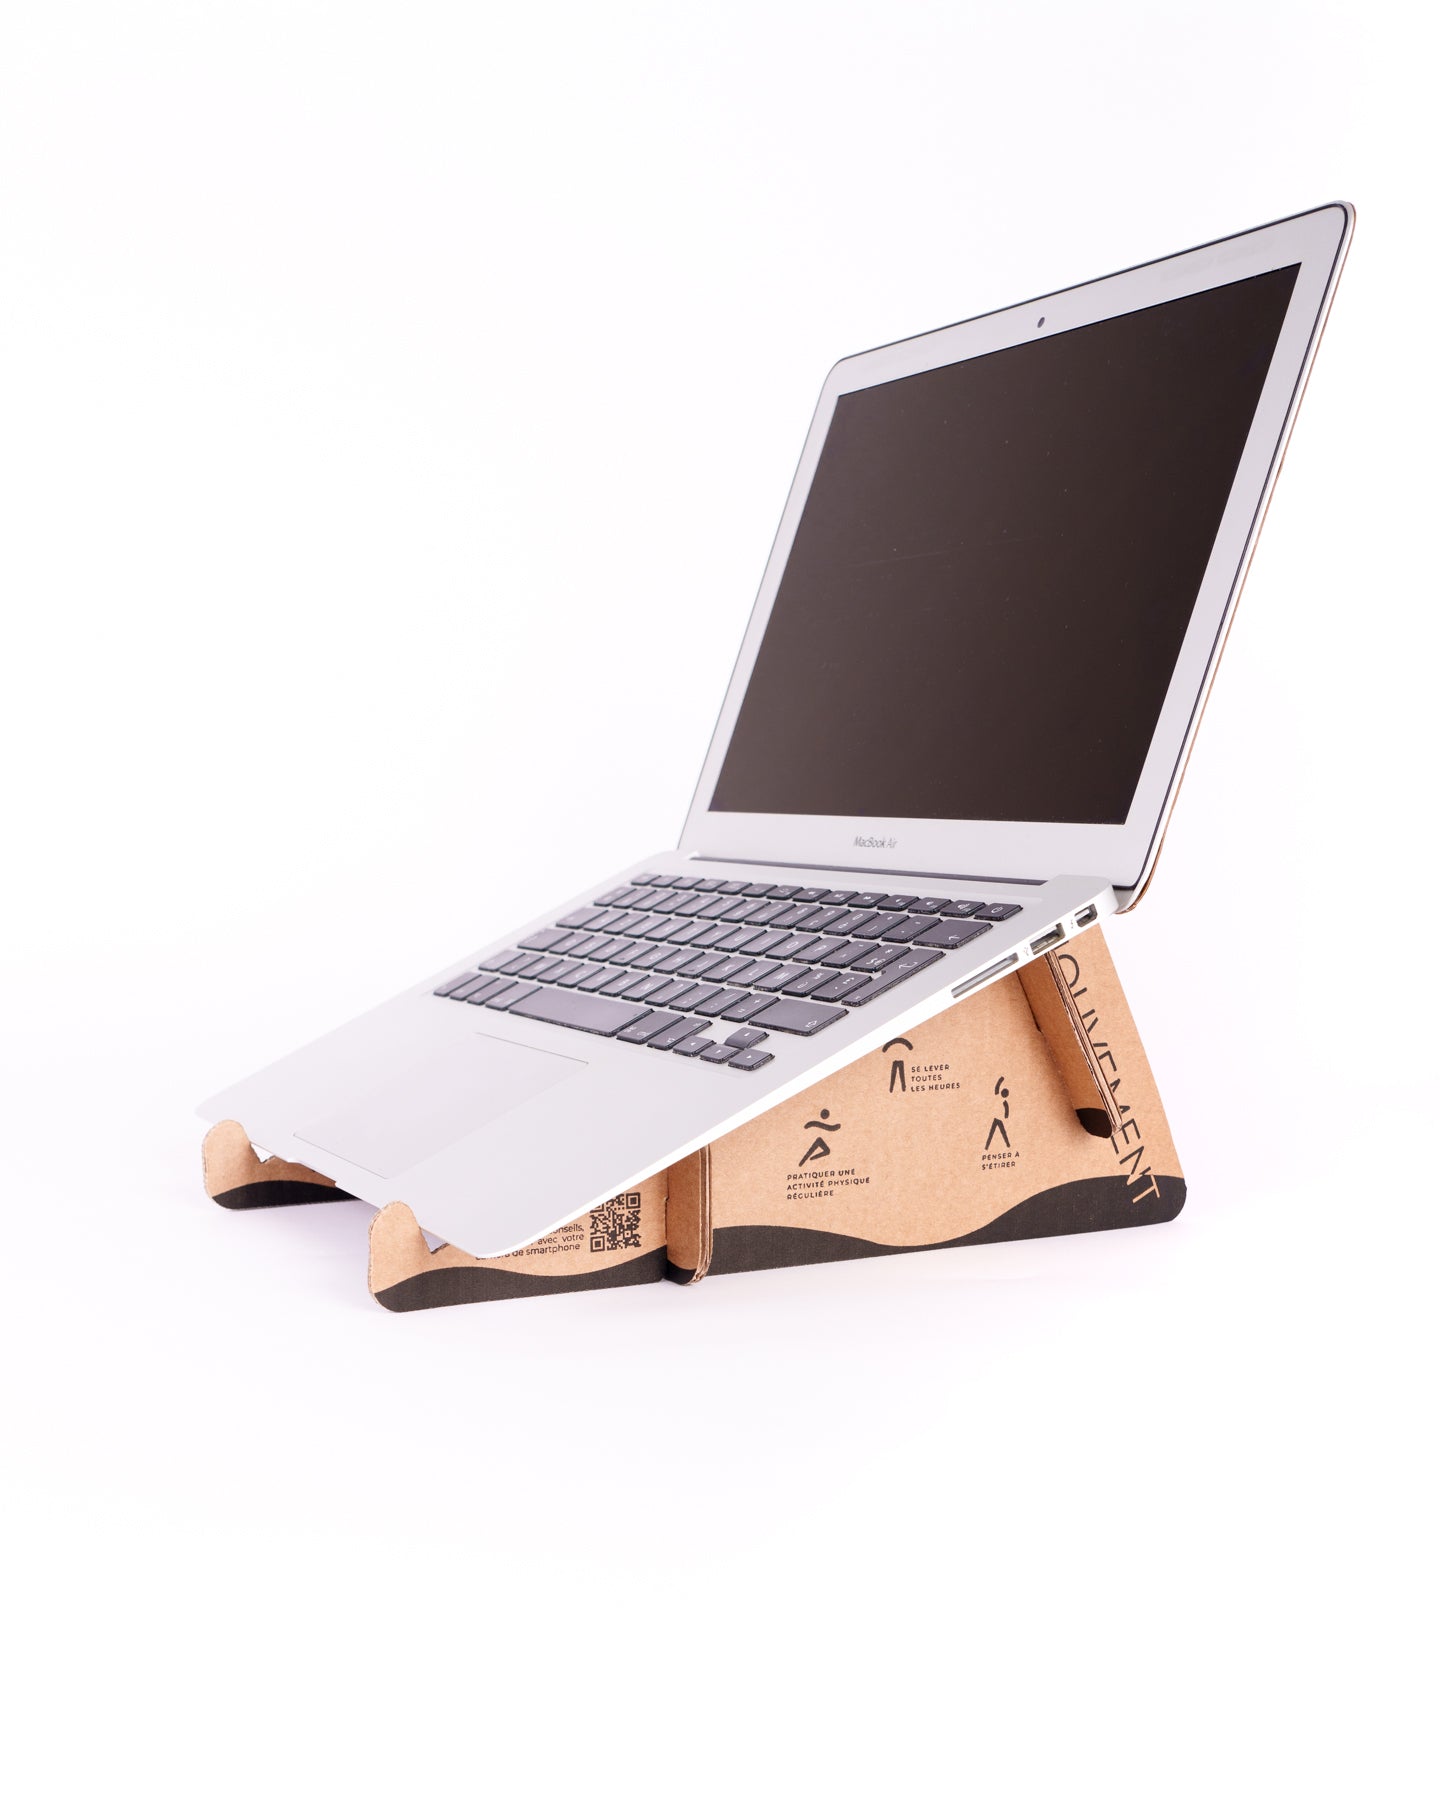 Computer stand made of recycled cardboard